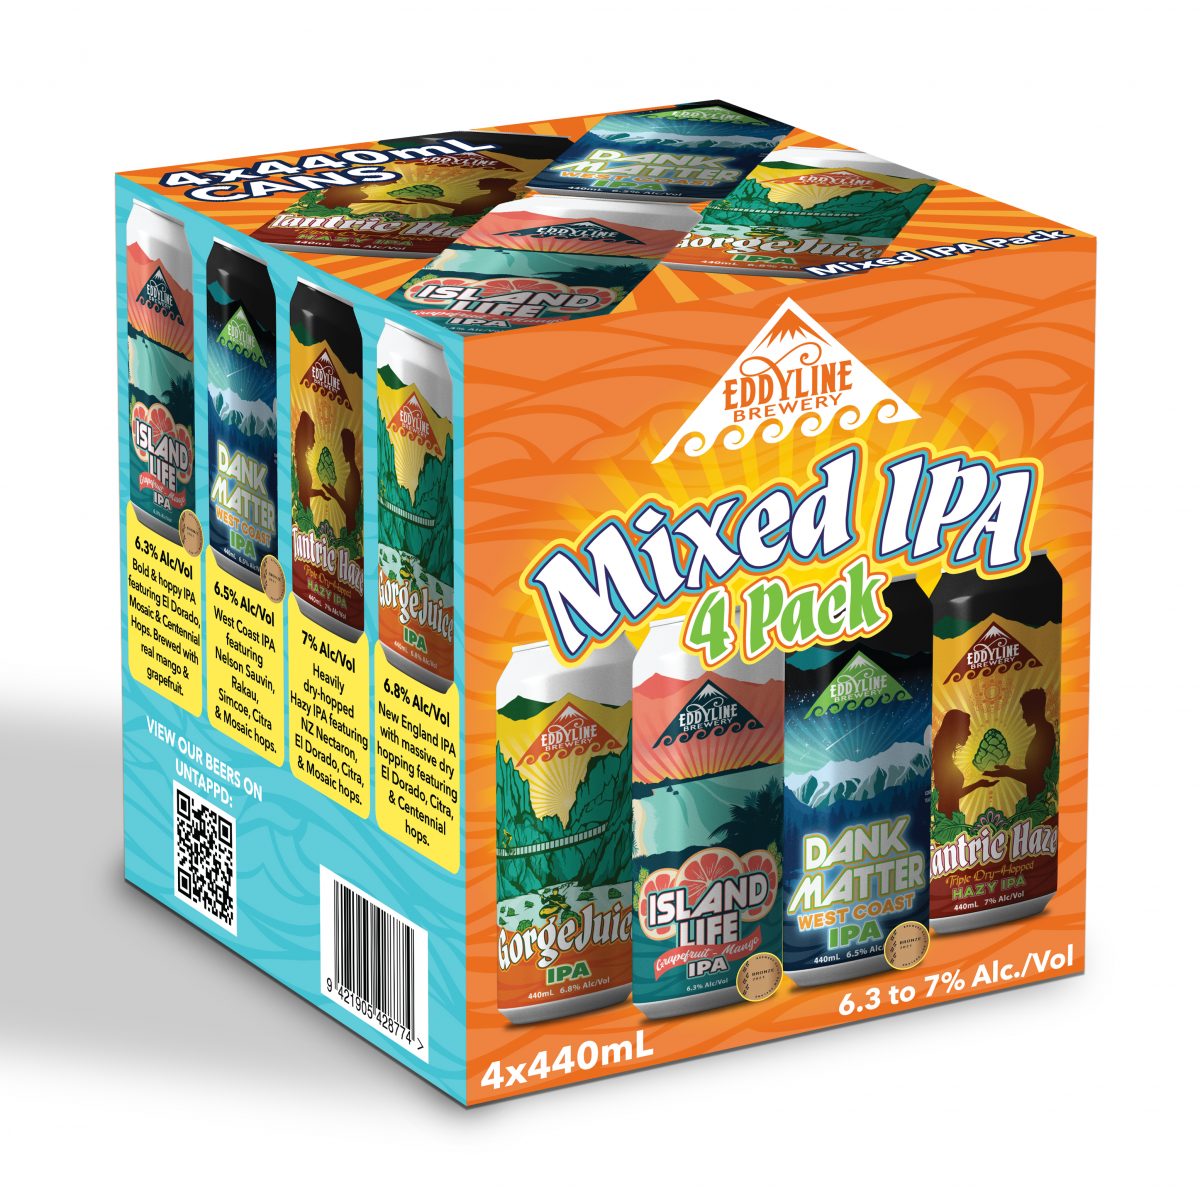 eddyline-mixed-ipa-craft-beer-4-pack-can-nelson-rolleston-pale-ale-hazy-hazyipa-